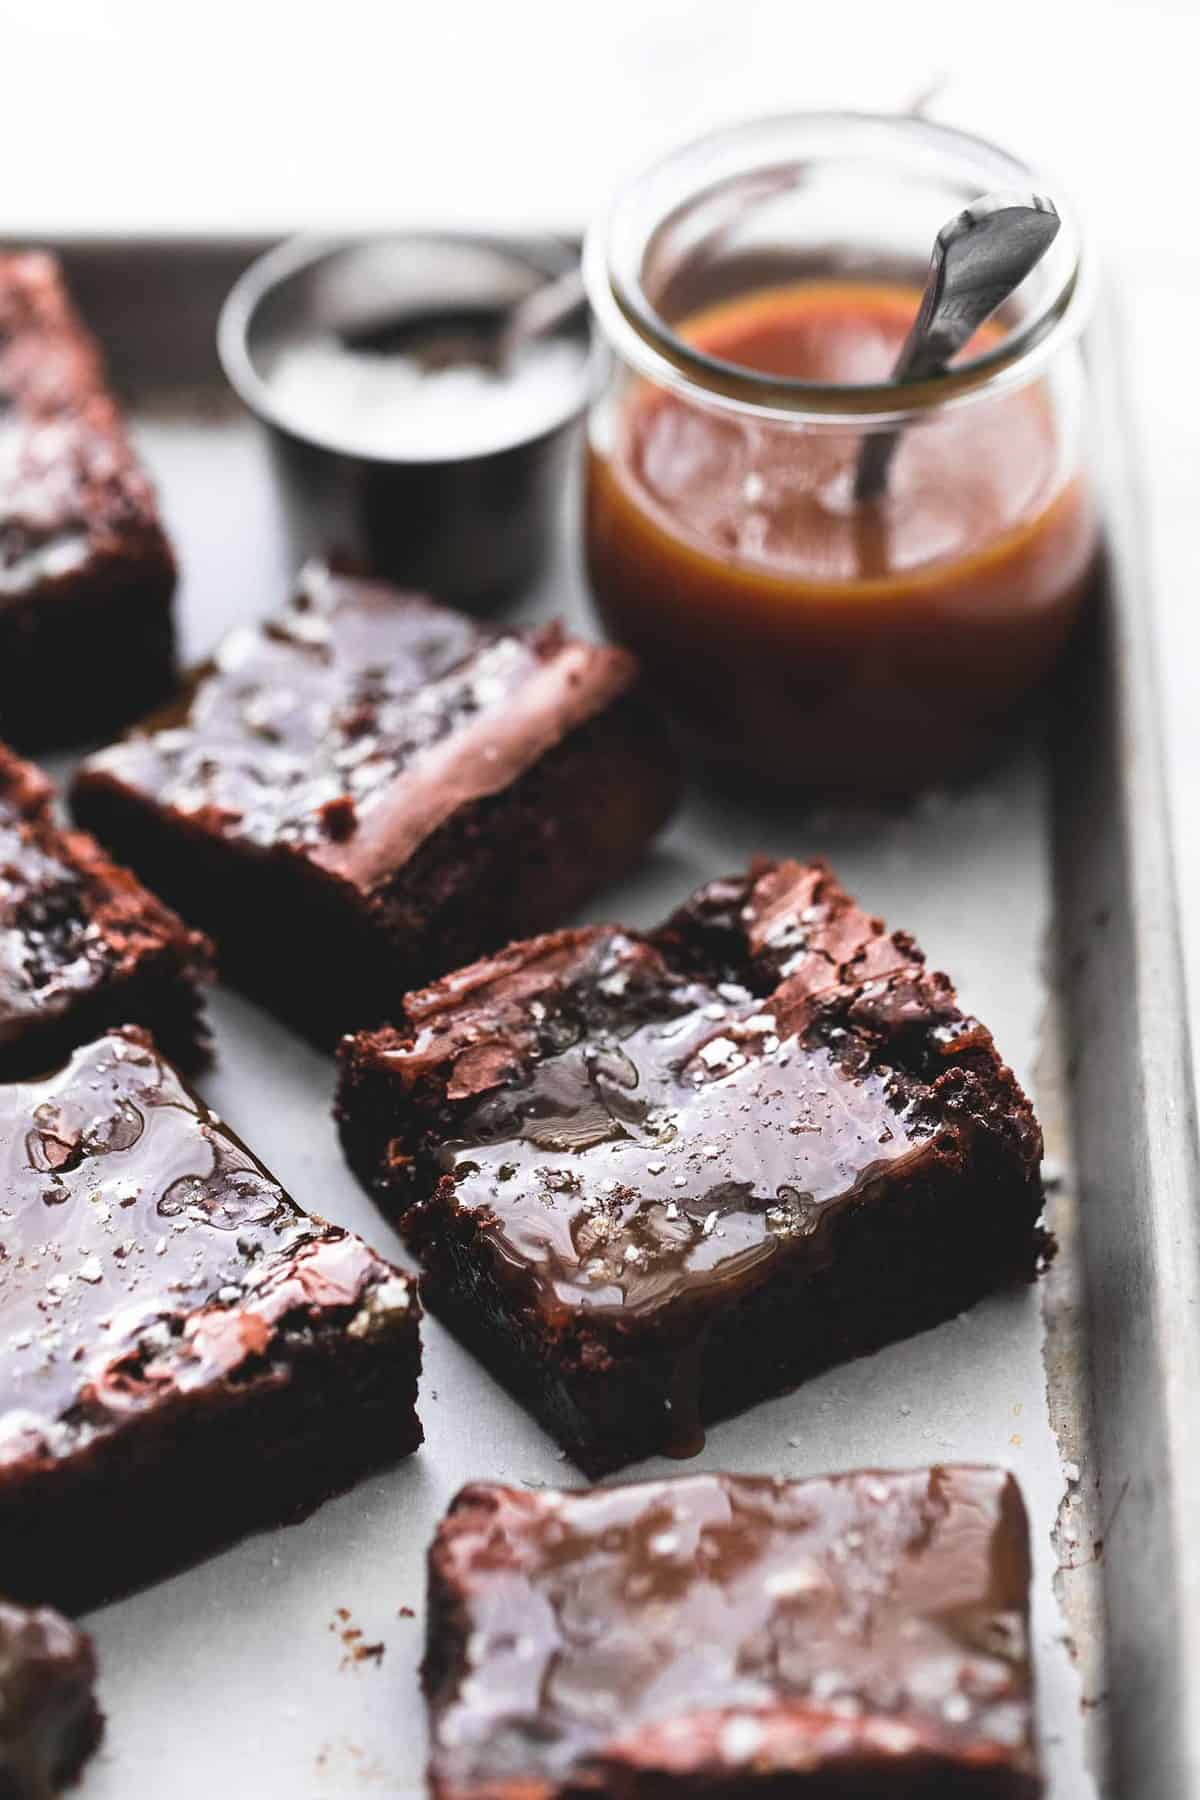 salted caramel brownies, a container of salt with a spoon and a jar of caramel with a spoon in the background all on a baking sheet.